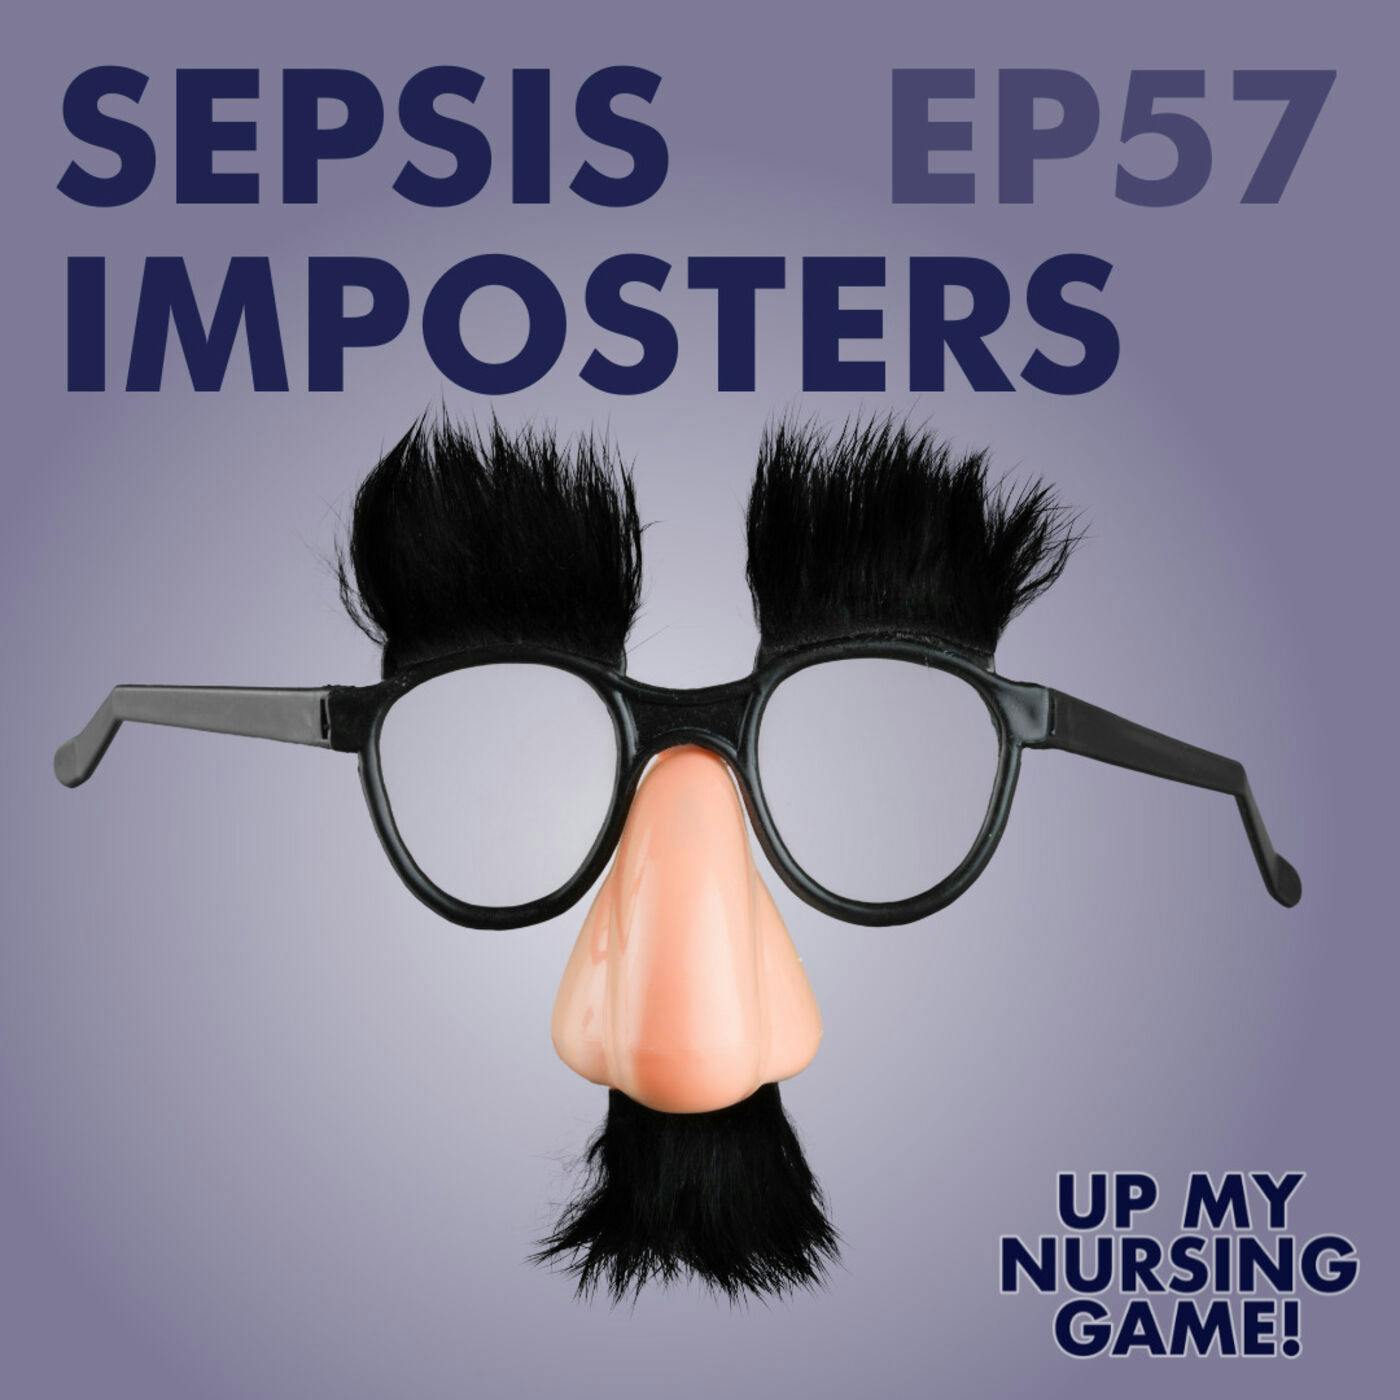 Sepsis Imposters: Don’t be fooled!